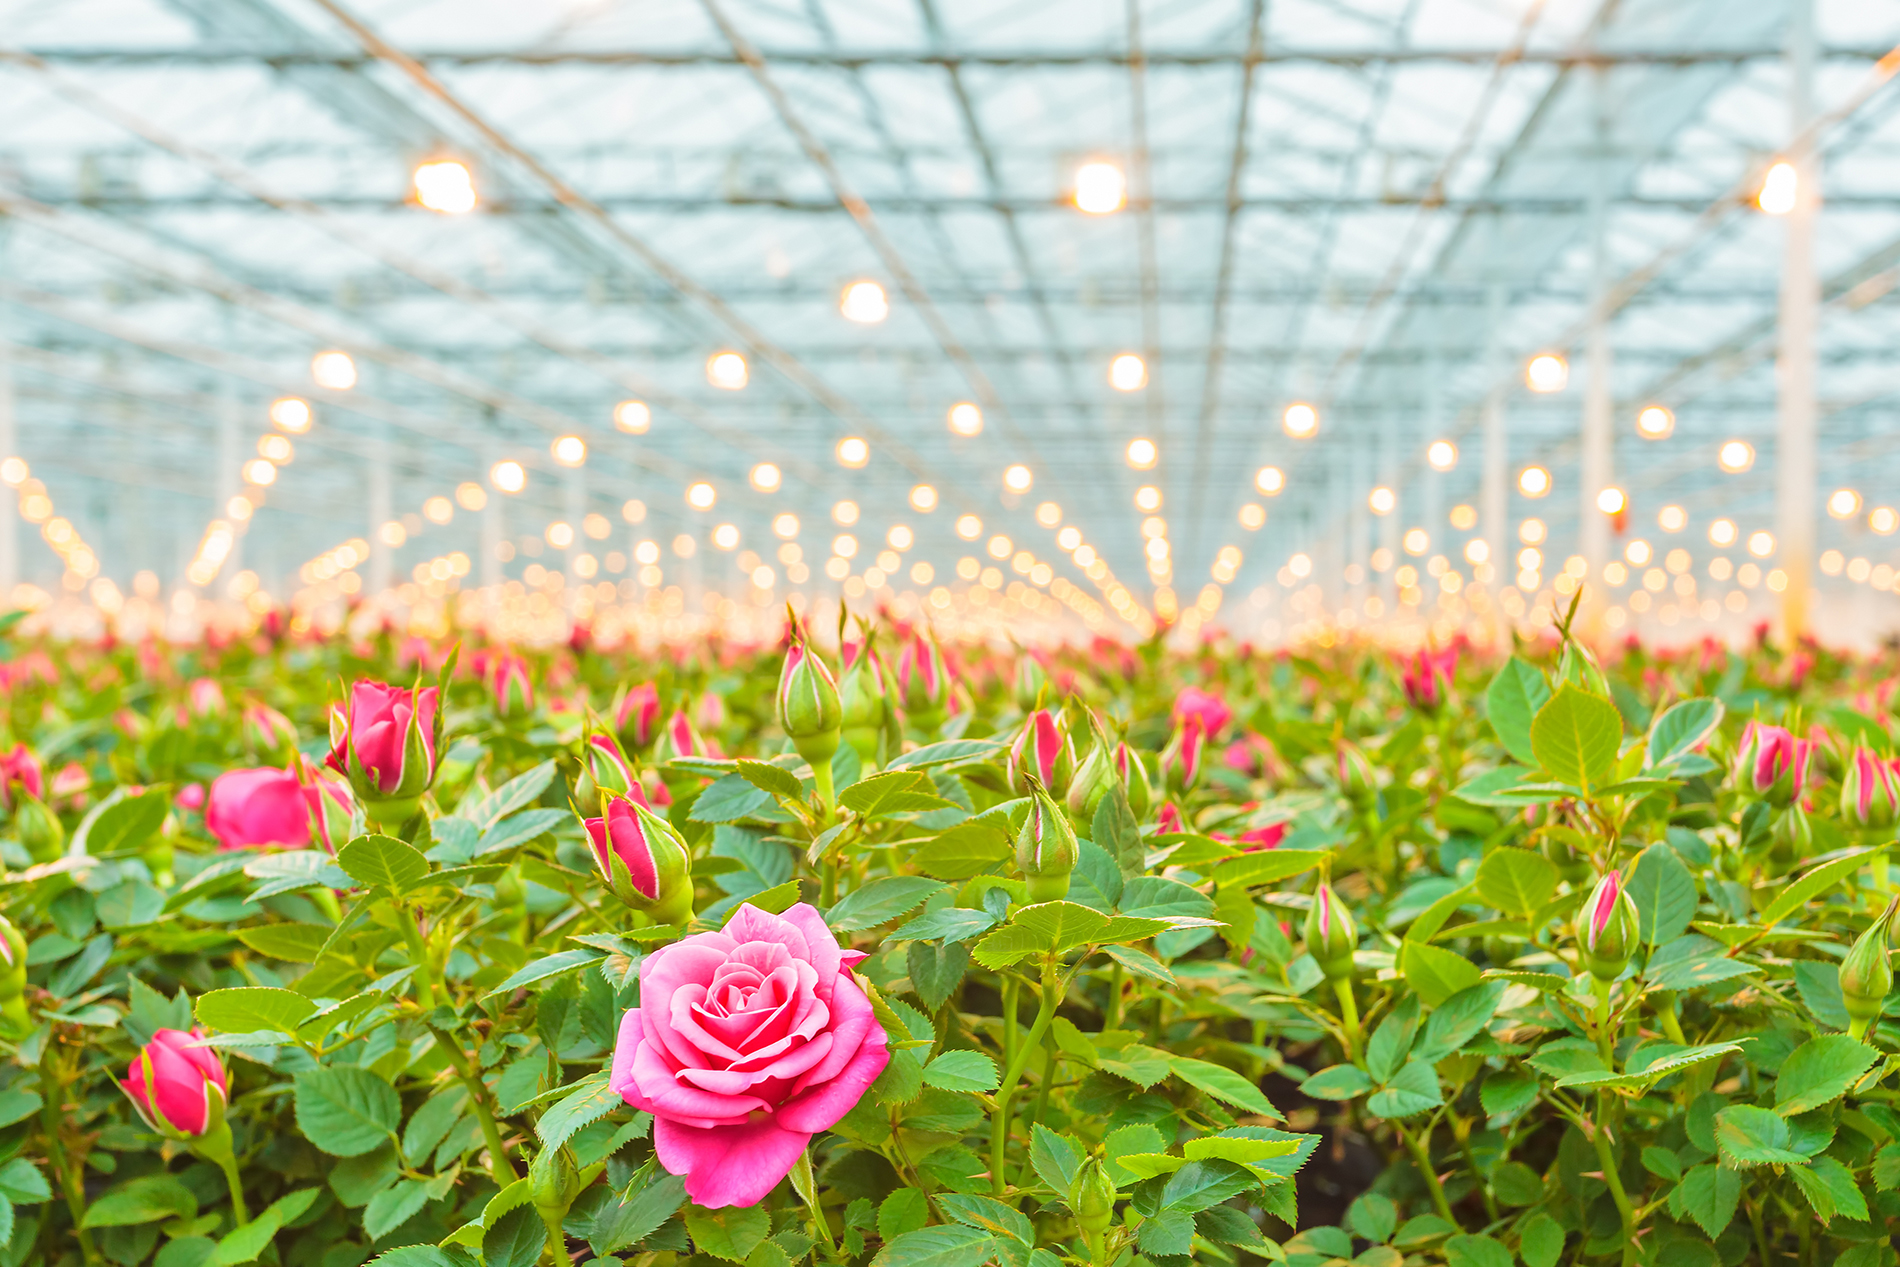 The Roses Grown In Greenhouse - Flowers In A Greenhouse , HD Wallpaper & Backgrounds